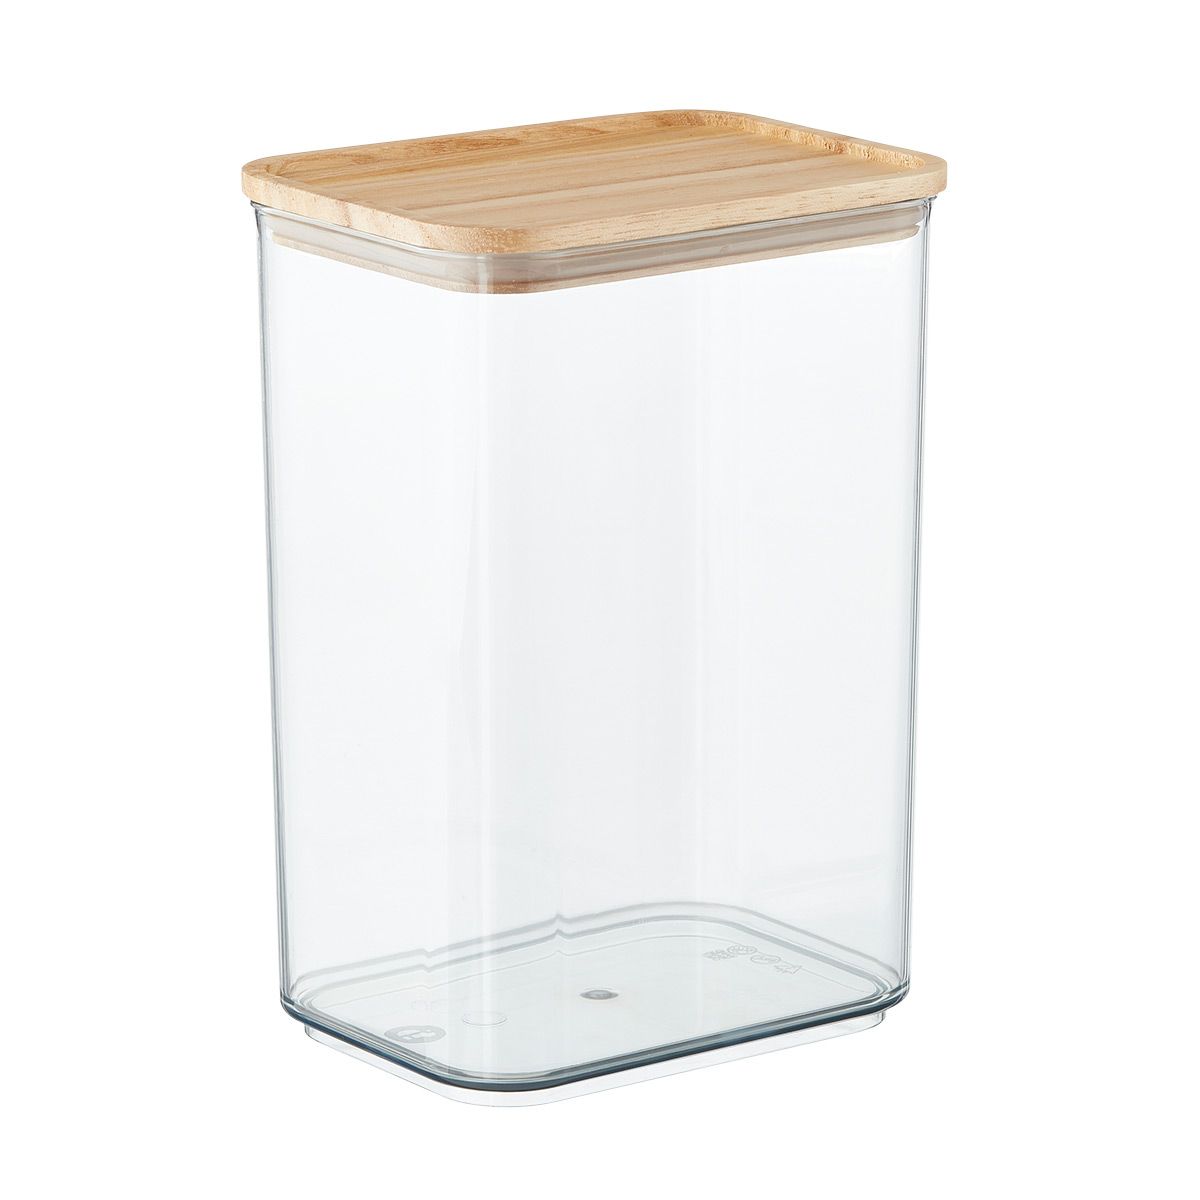 Rosanna Pansino x iD 13.3 c. Canister w/ Wood Lid Clear | The Container Store